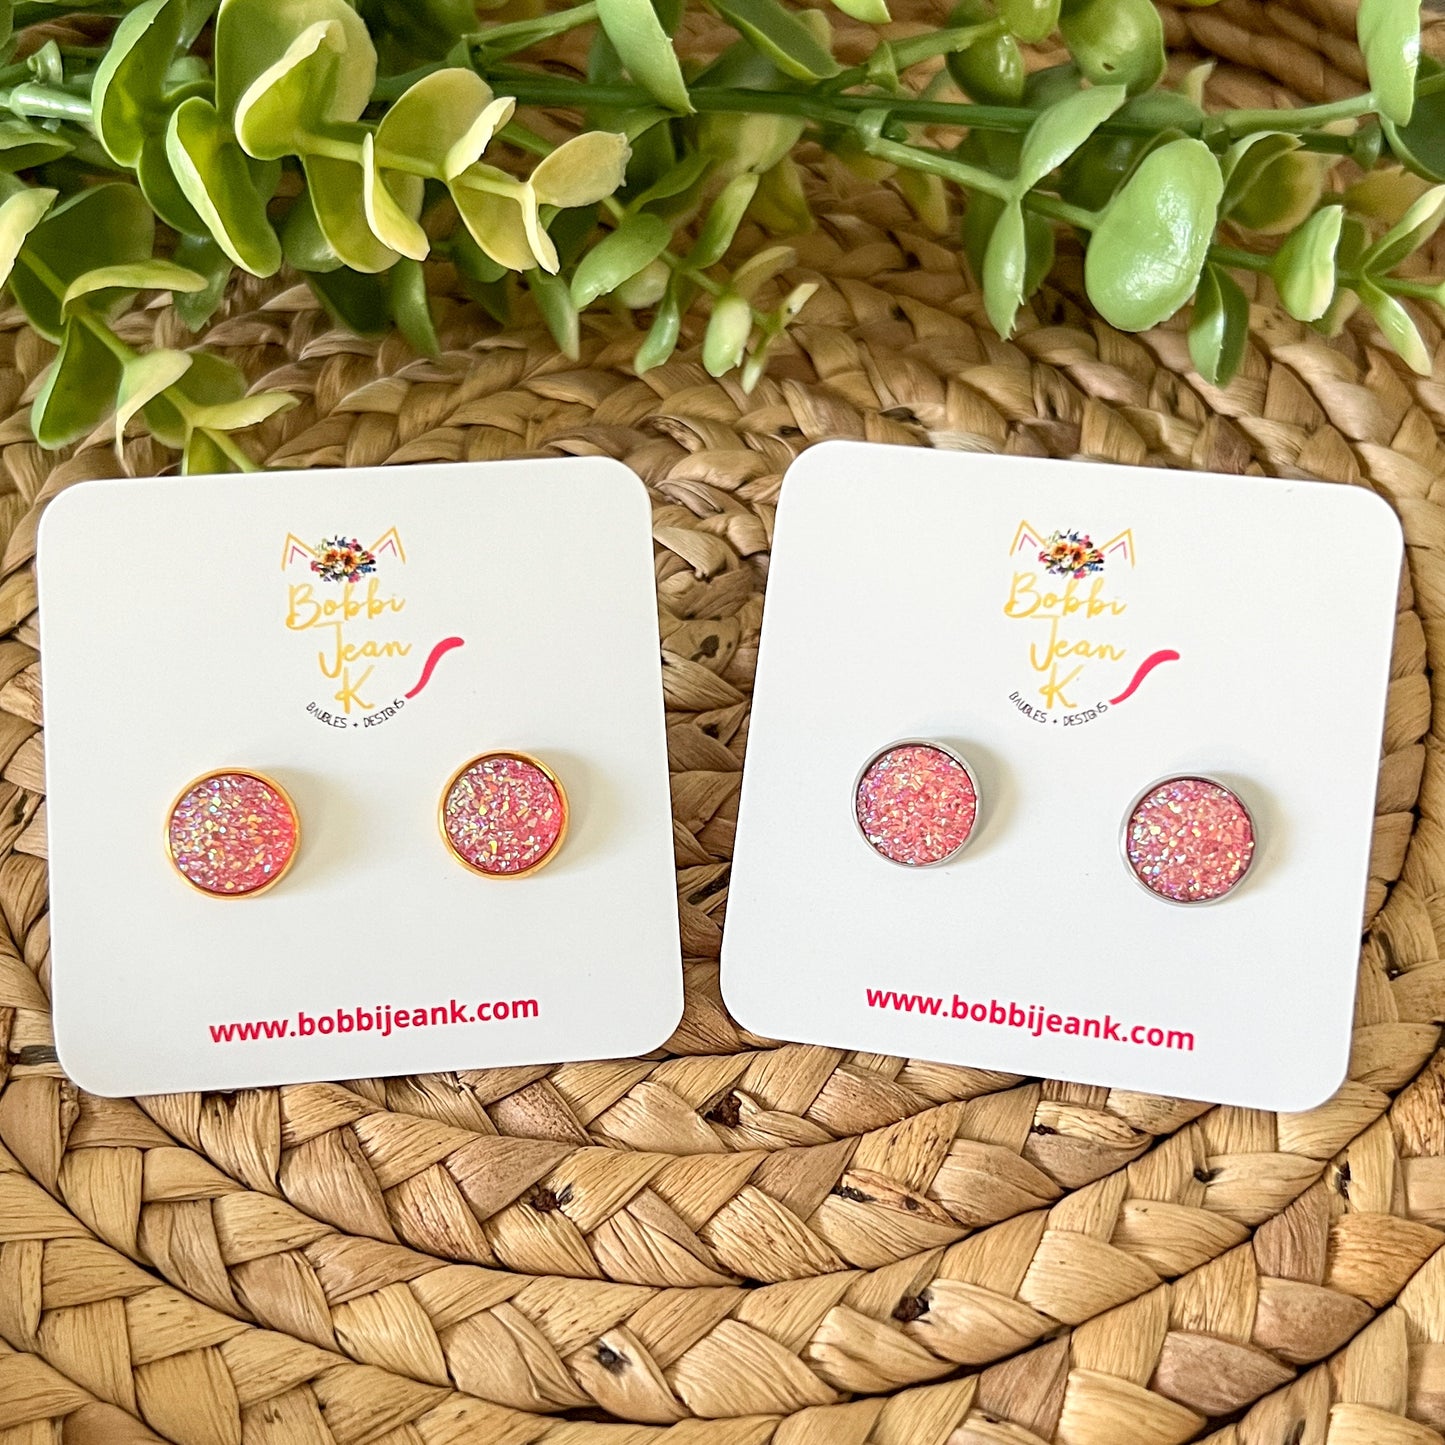 Pink Faux Druzy Studs 12mm: Choose Silver or Gold Settings